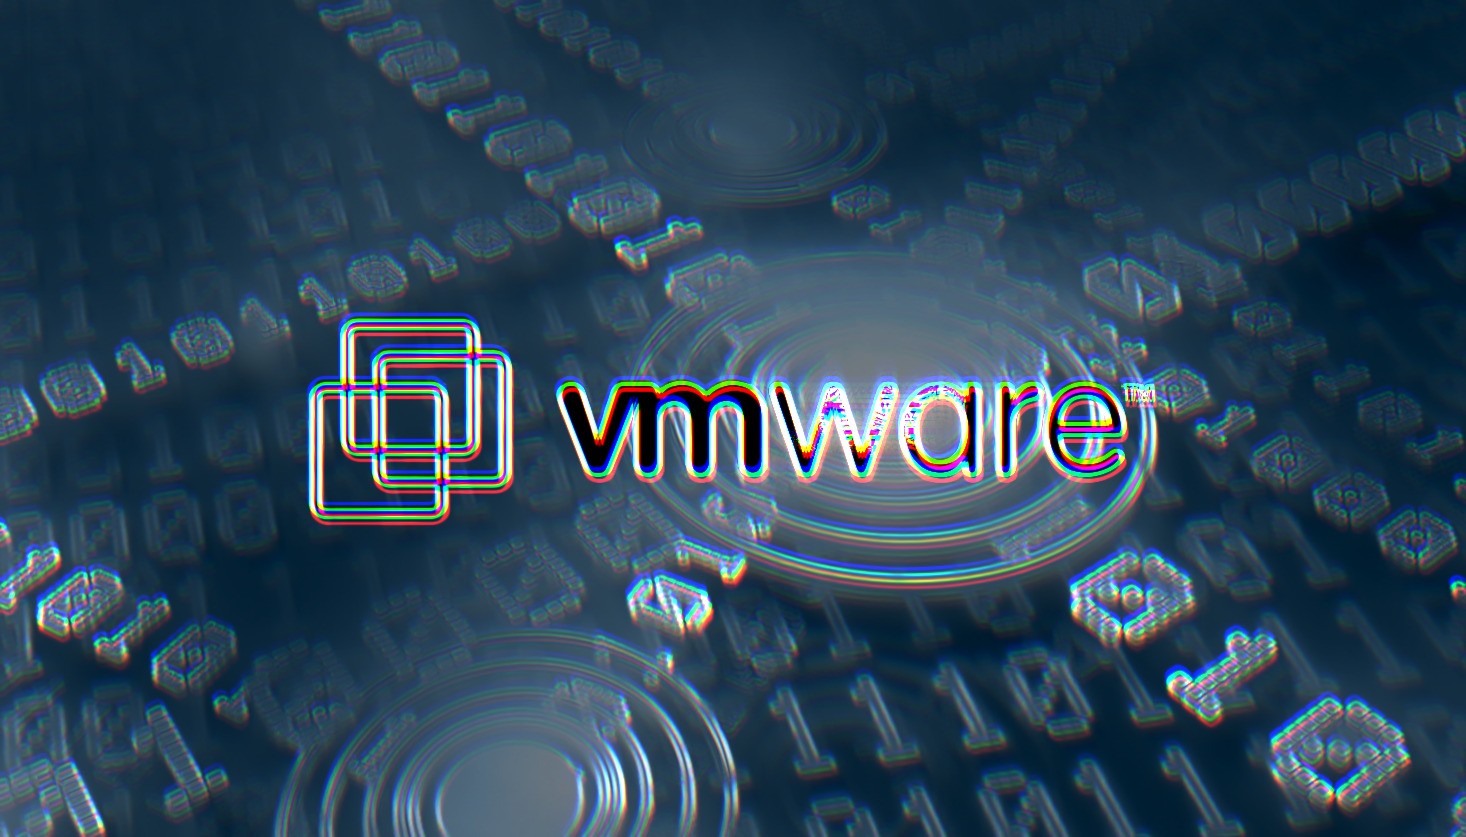 Critical remote code execution flaw in thousands of VMWare 